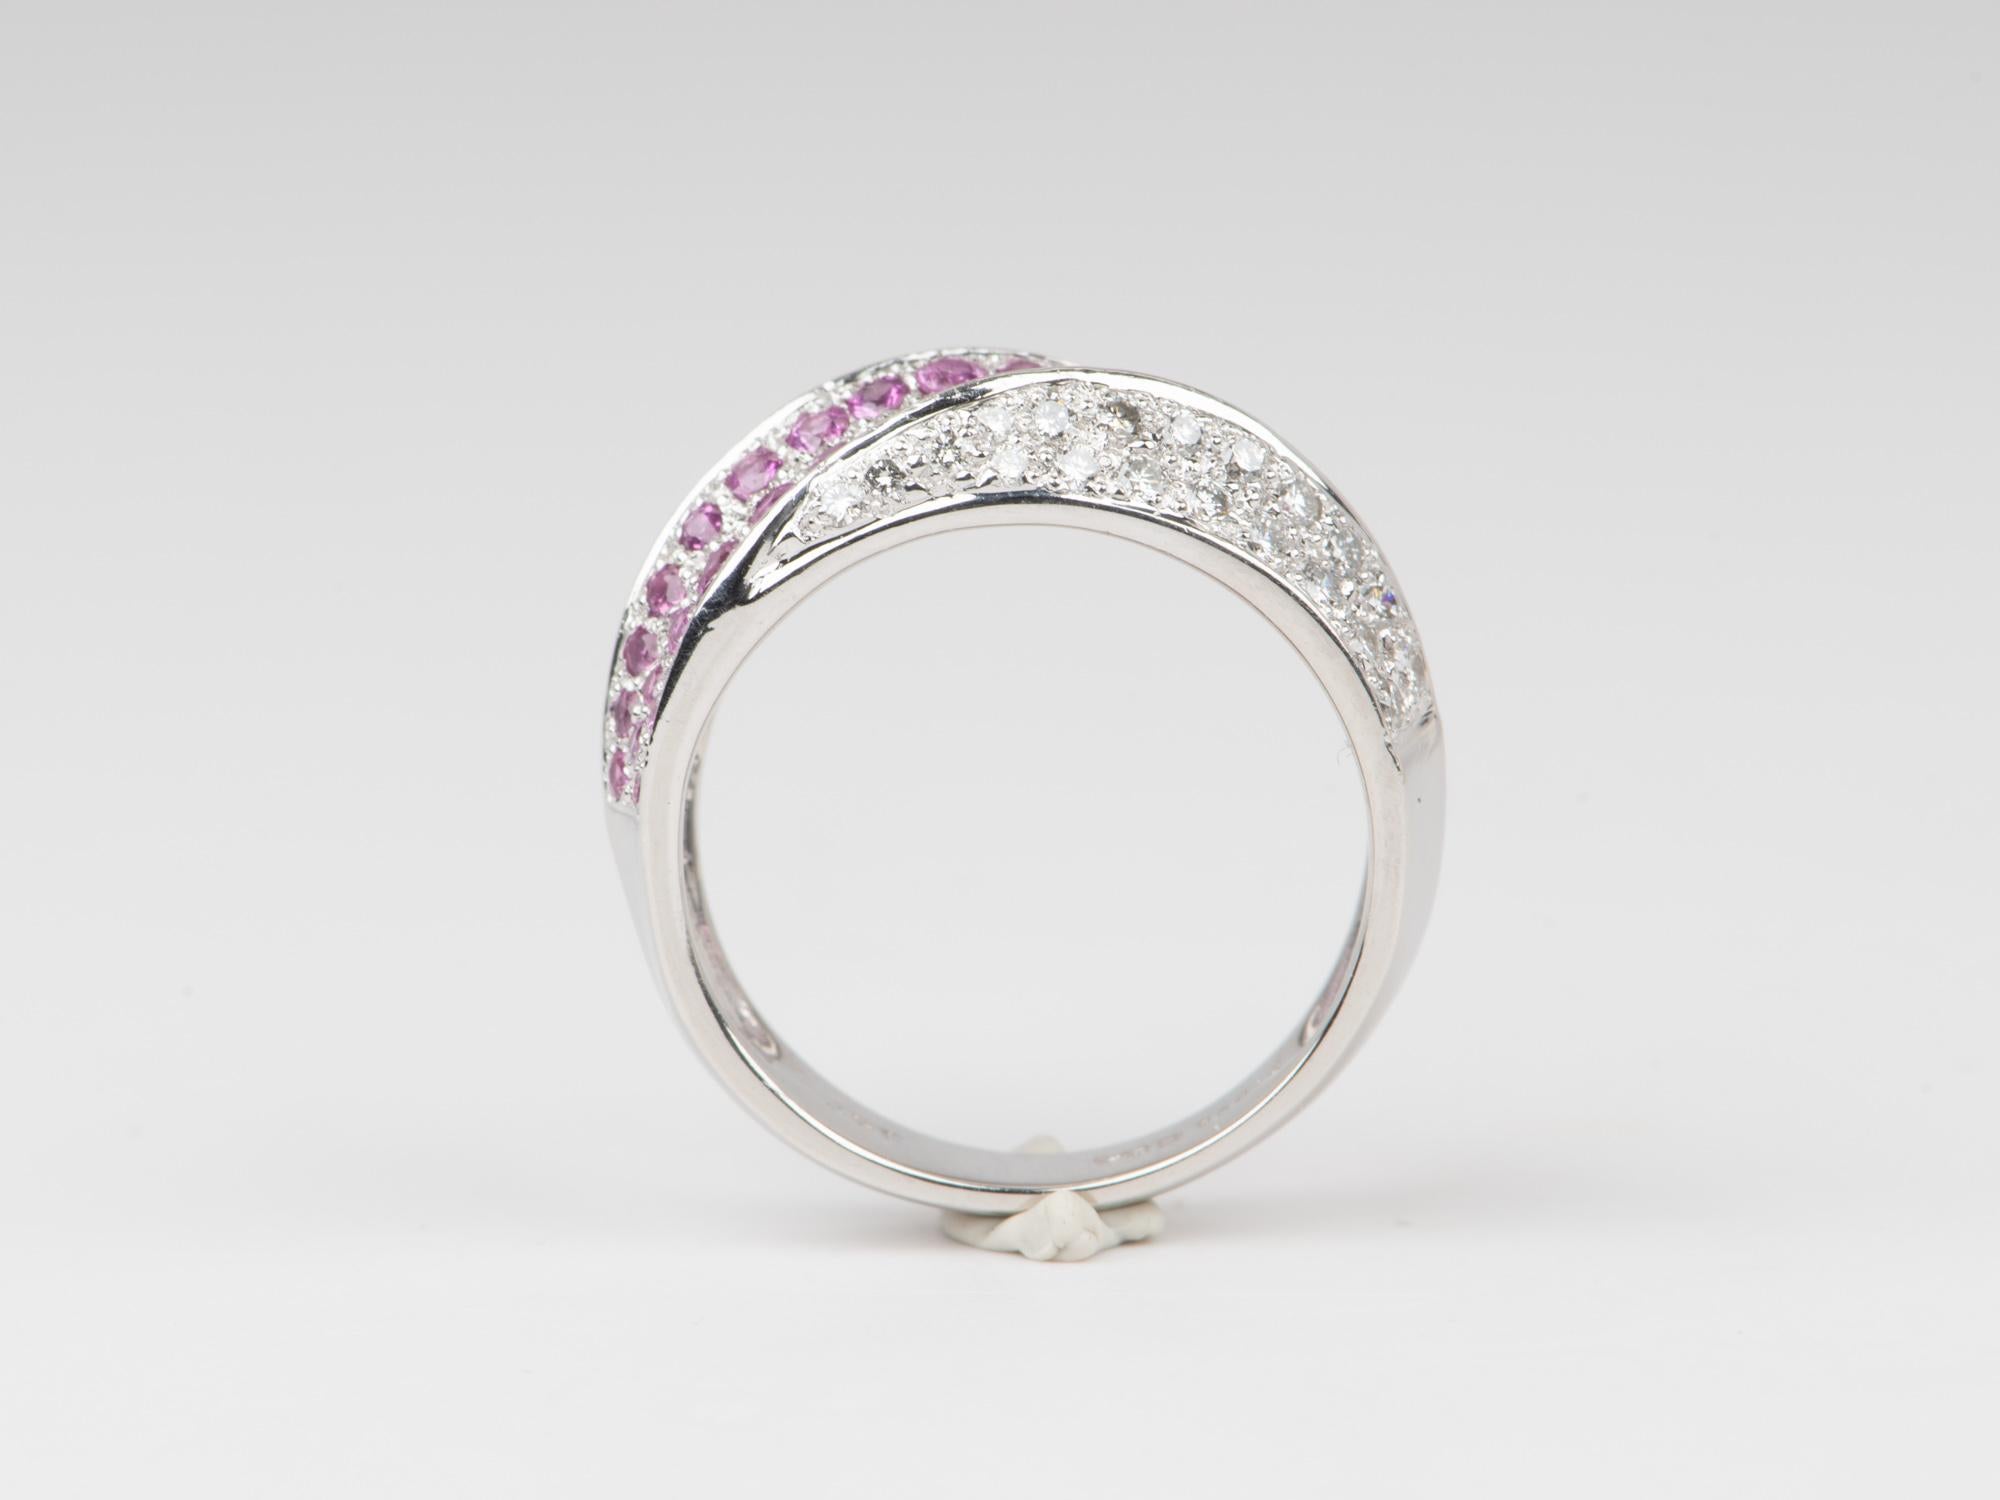 Dual Tone Three Dimensional Diamond and Pink Sapphire Band Ring 18K Gold V1130 In New Condition For Sale In Osprey, FL